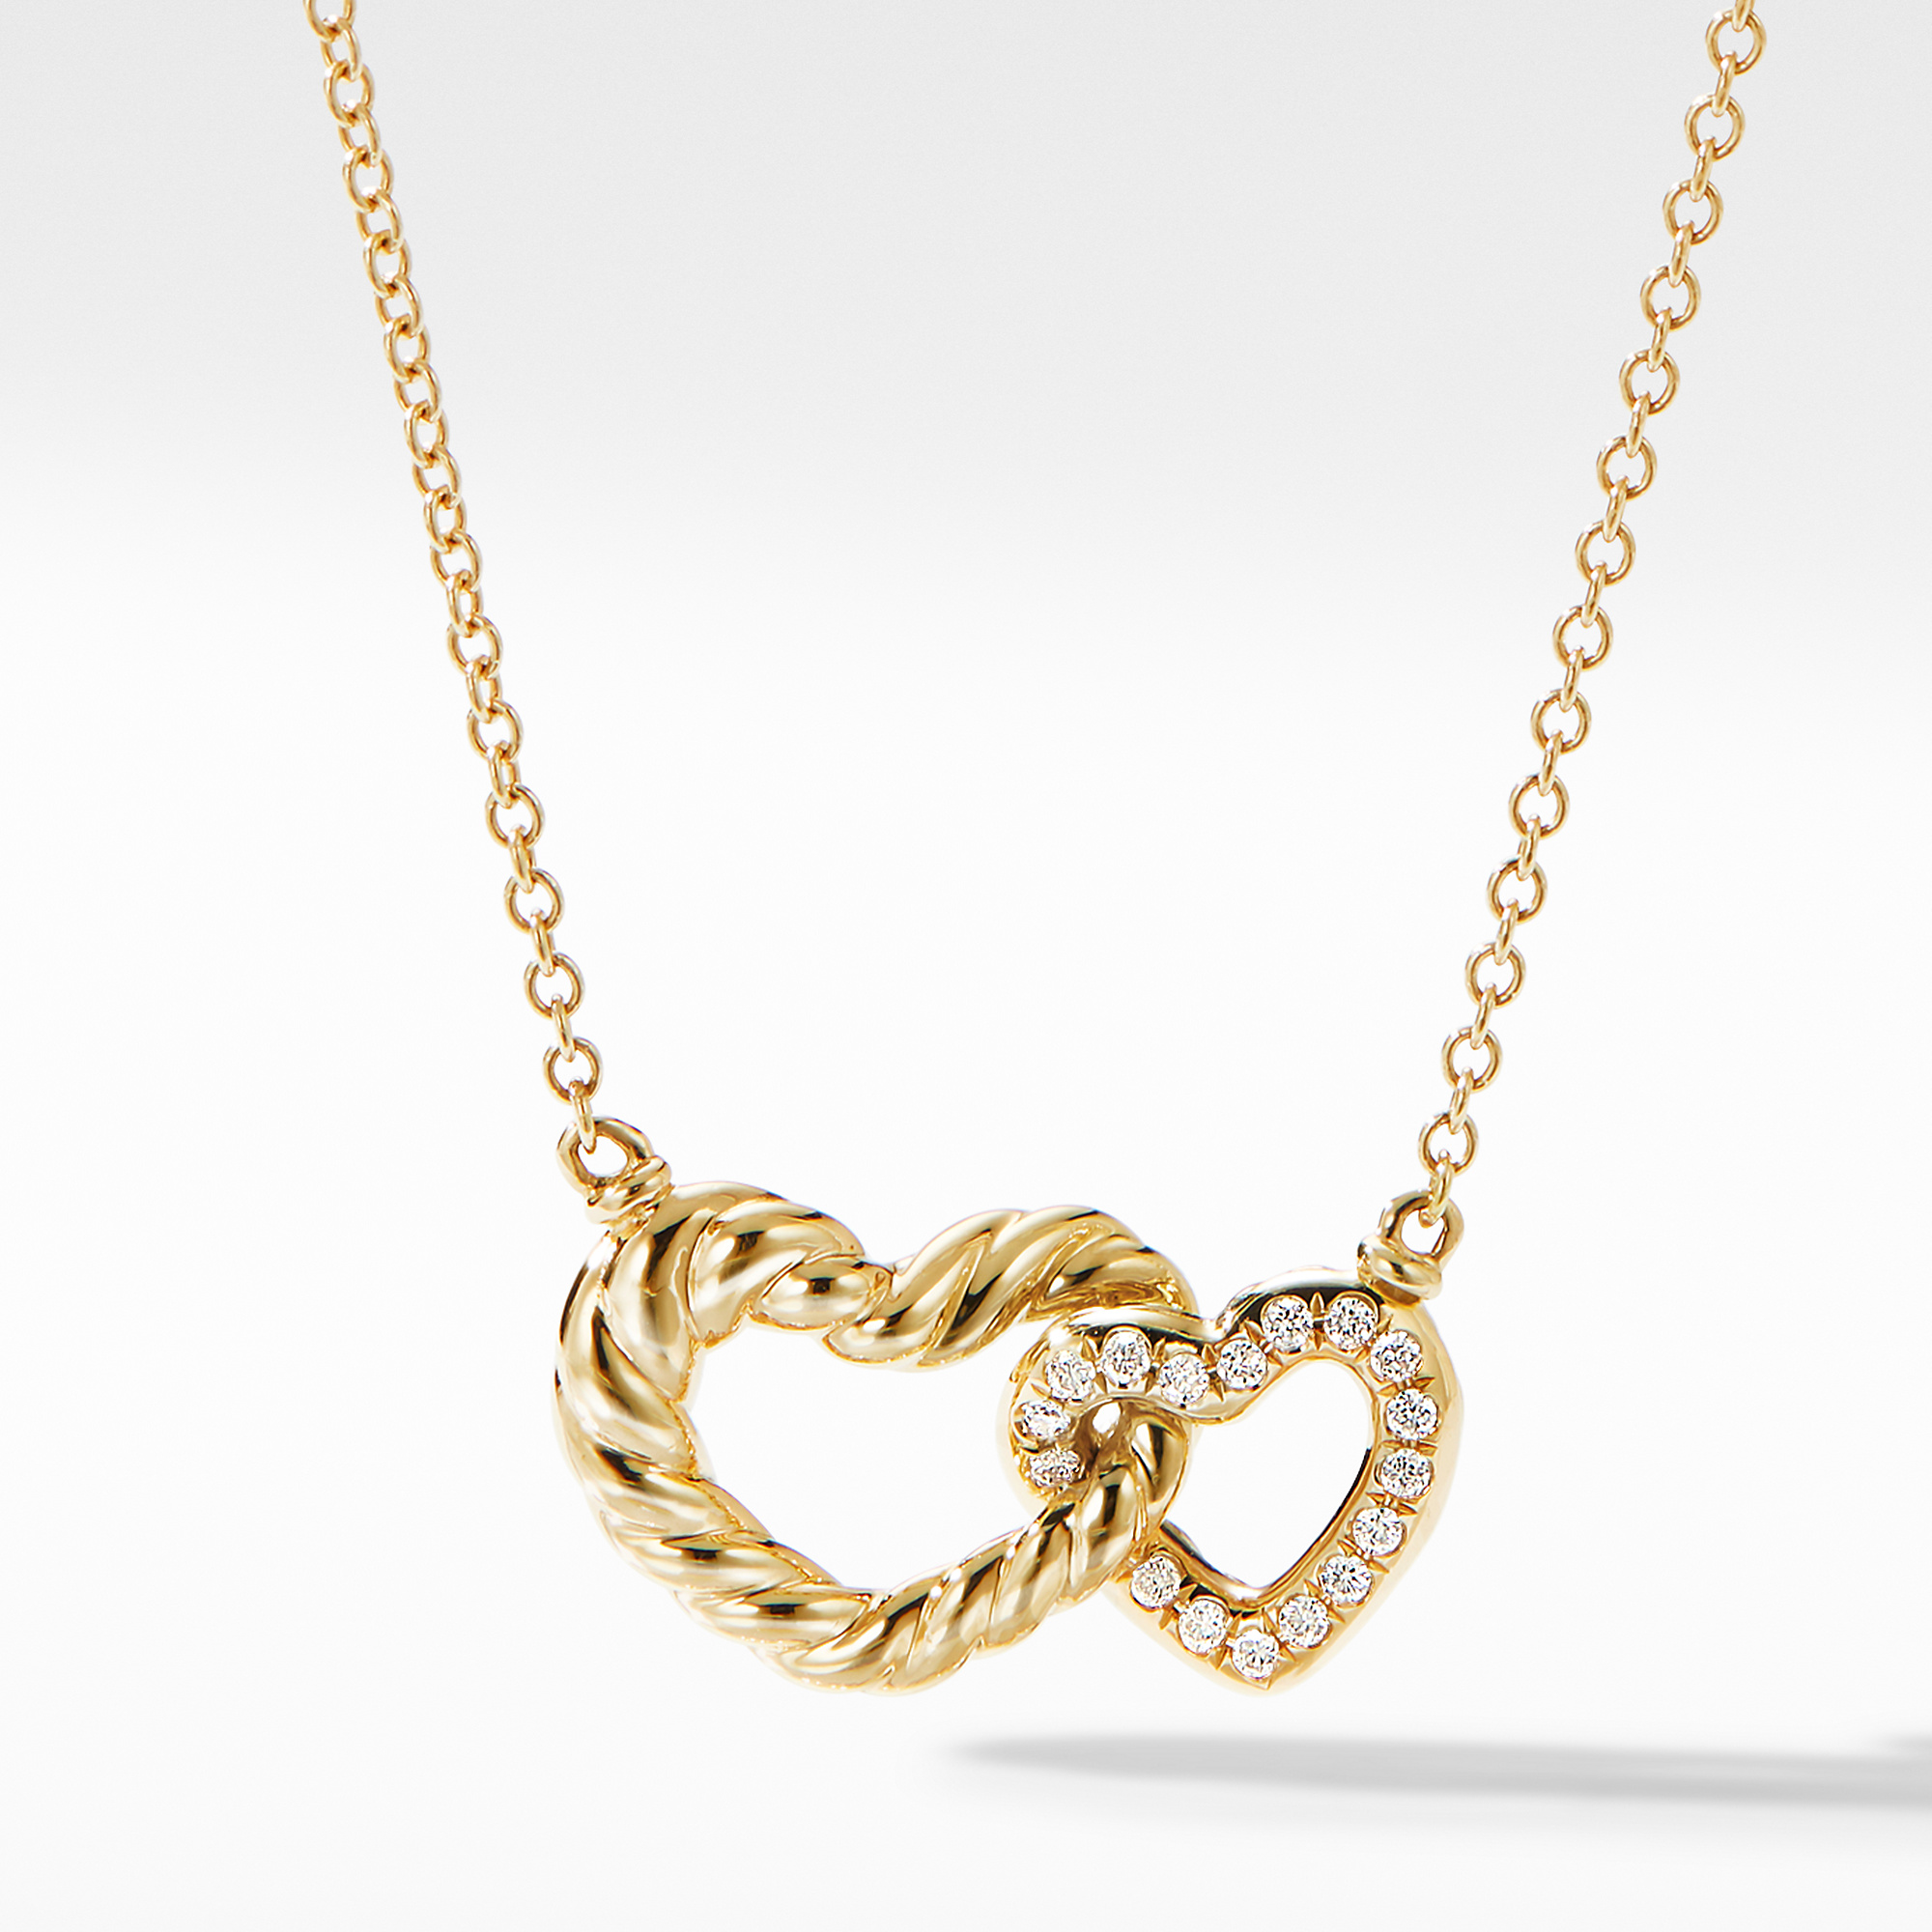 Cable Collectibles® Interlocking Heart Necklace in 18K Yellow Gold with Pave Diamonds